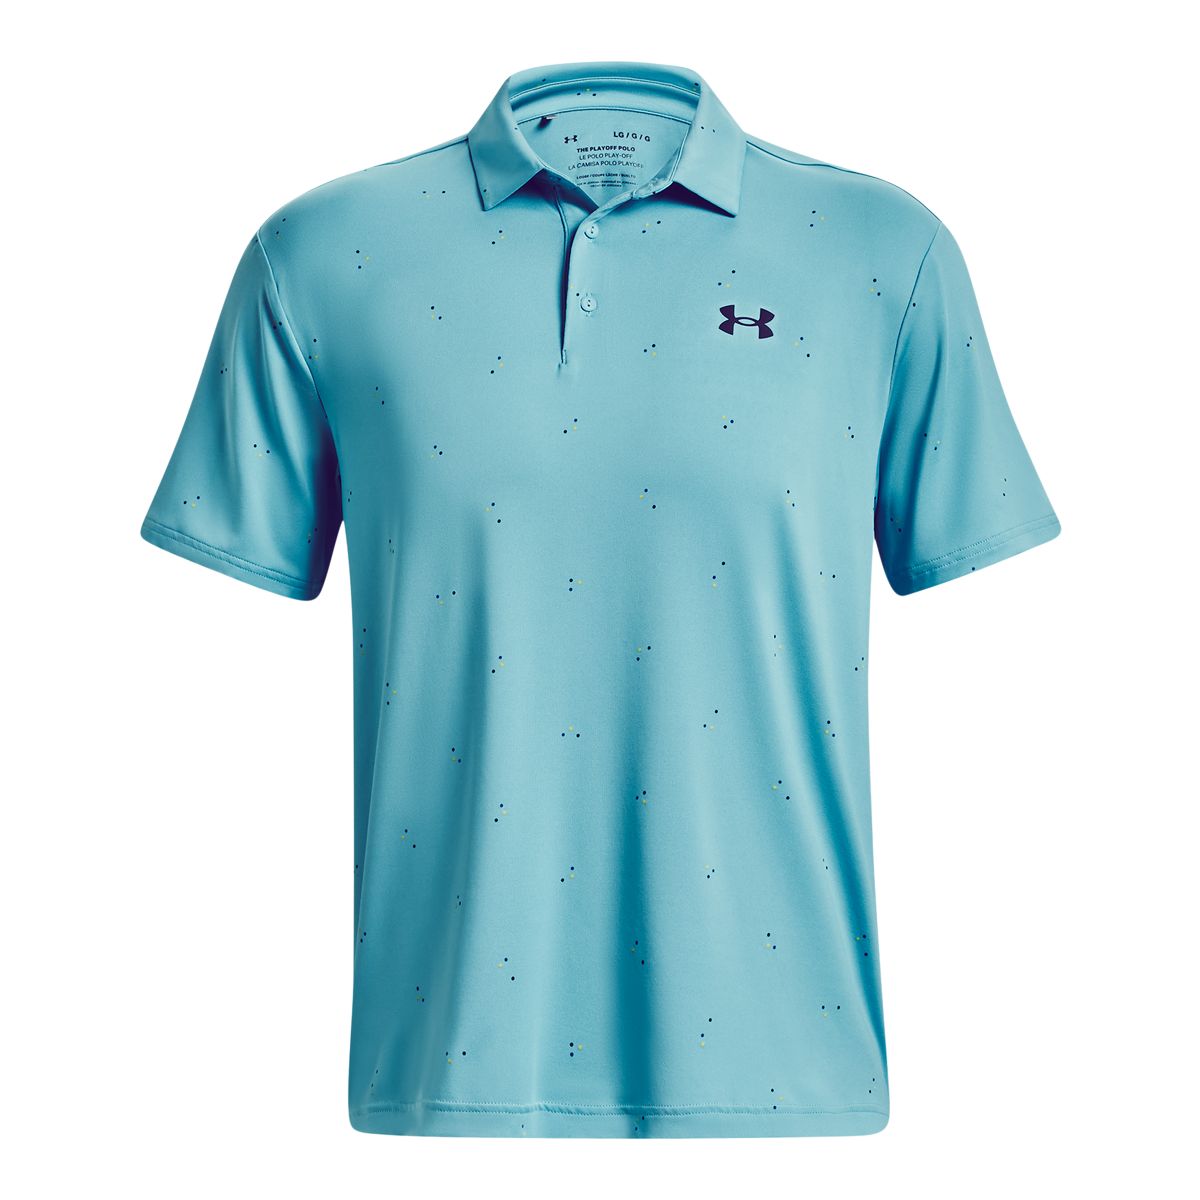 Under Armour Men's Playoff Polo 3.0 Print T Shirt